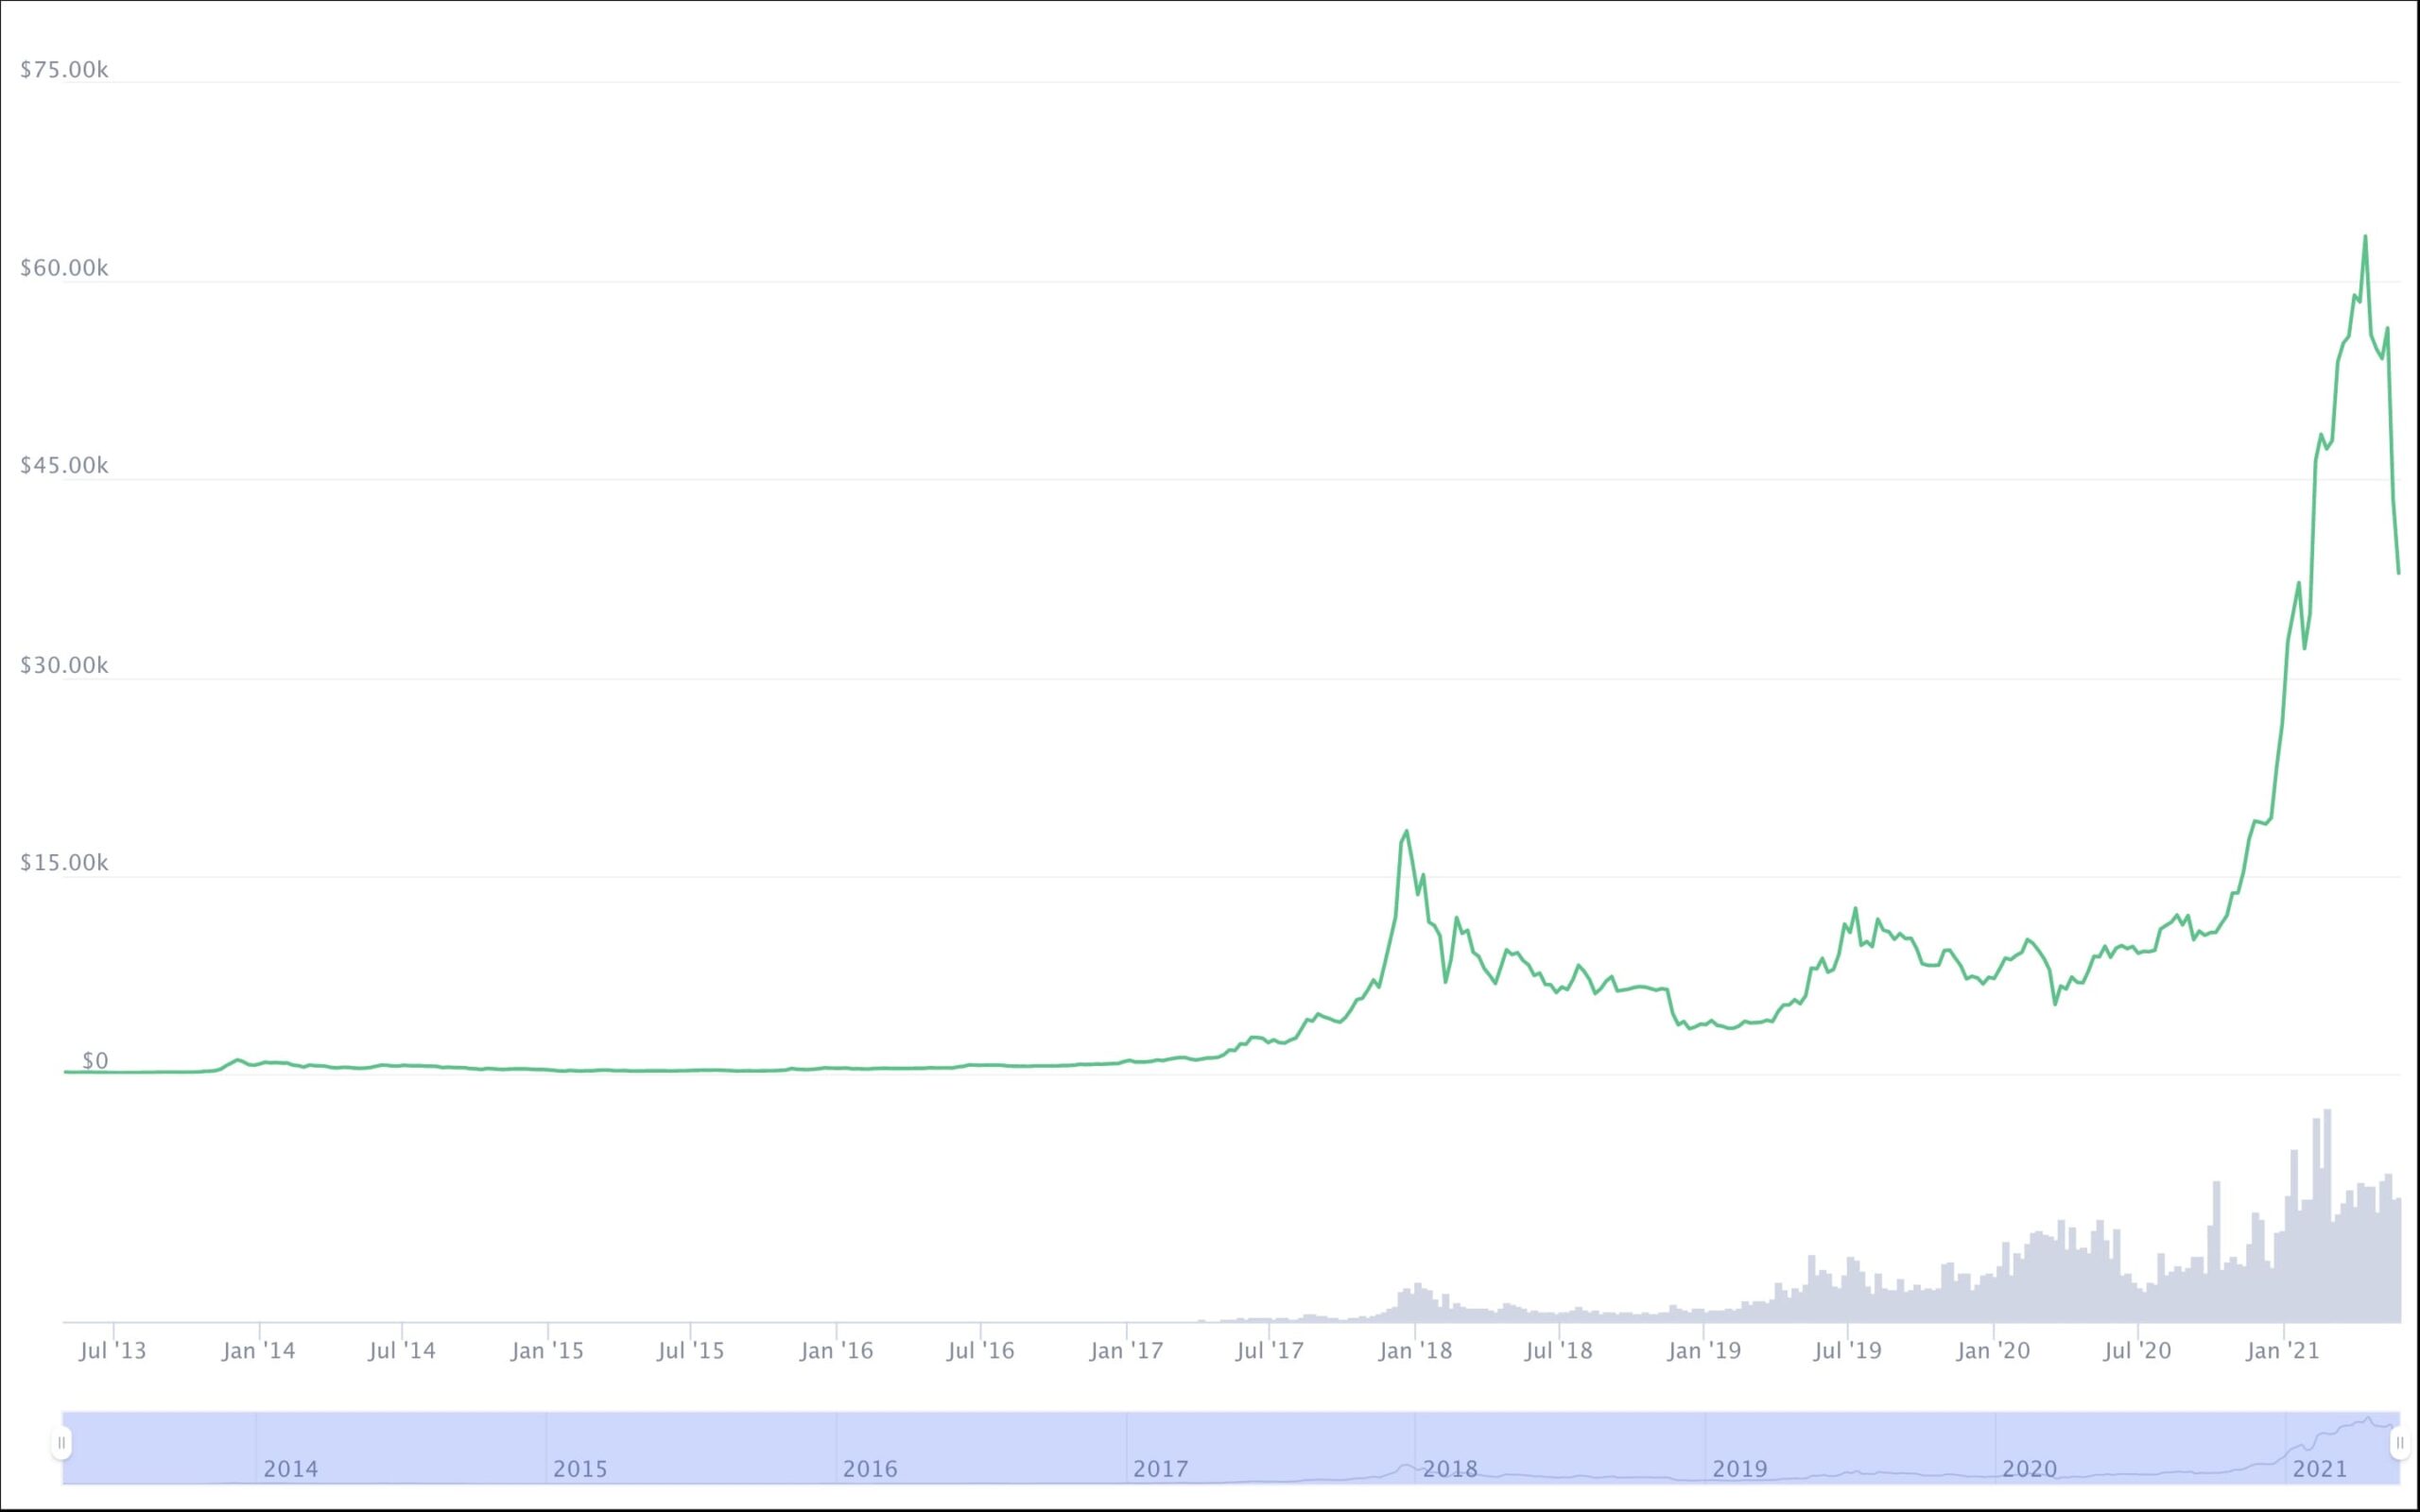 bitcoin historical price chart 2021 - how does bitcoin behave in relation to the U.S. market